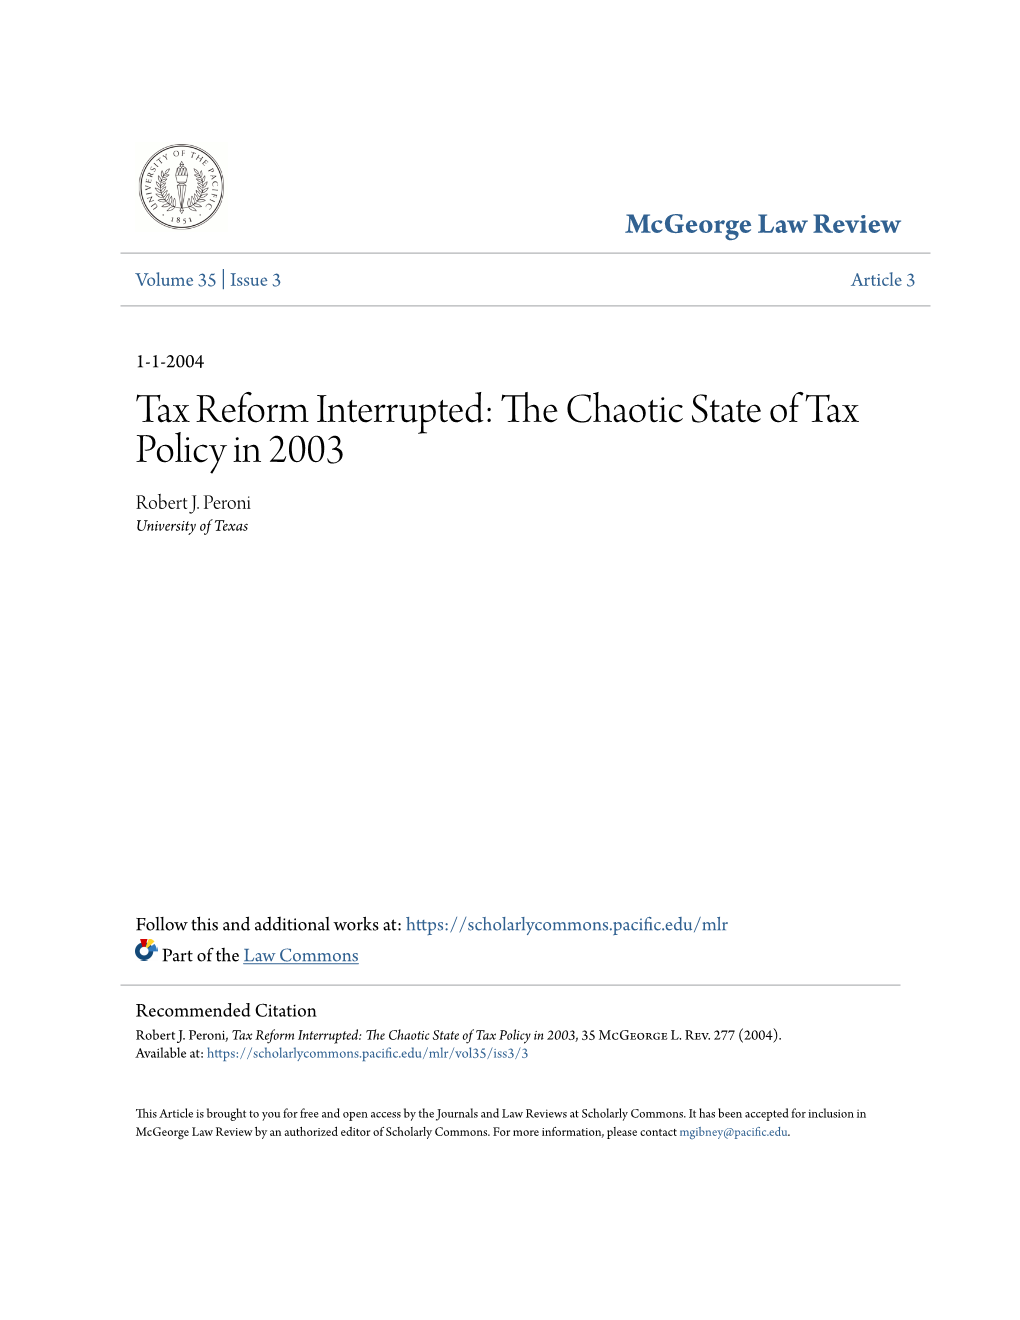 Tax Reform Interrupted: the Hc Aotic State of Tax Policy in 2003 Robert J